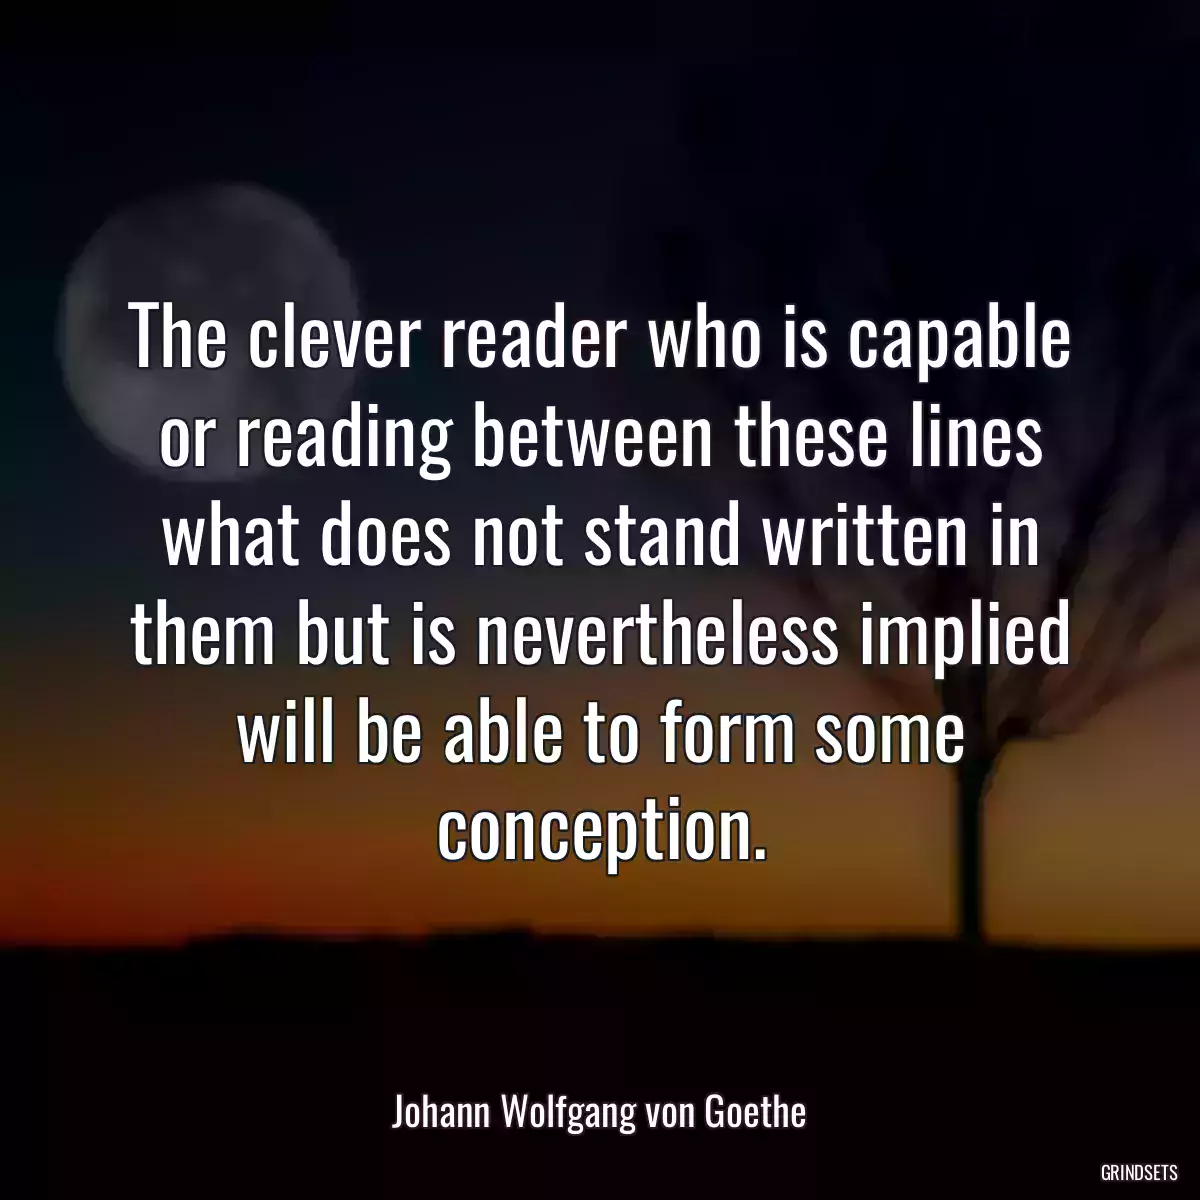 The clever reader who is capable or reading between these lines what does not stand written in them but is nevertheless implied will be able to form some conception.